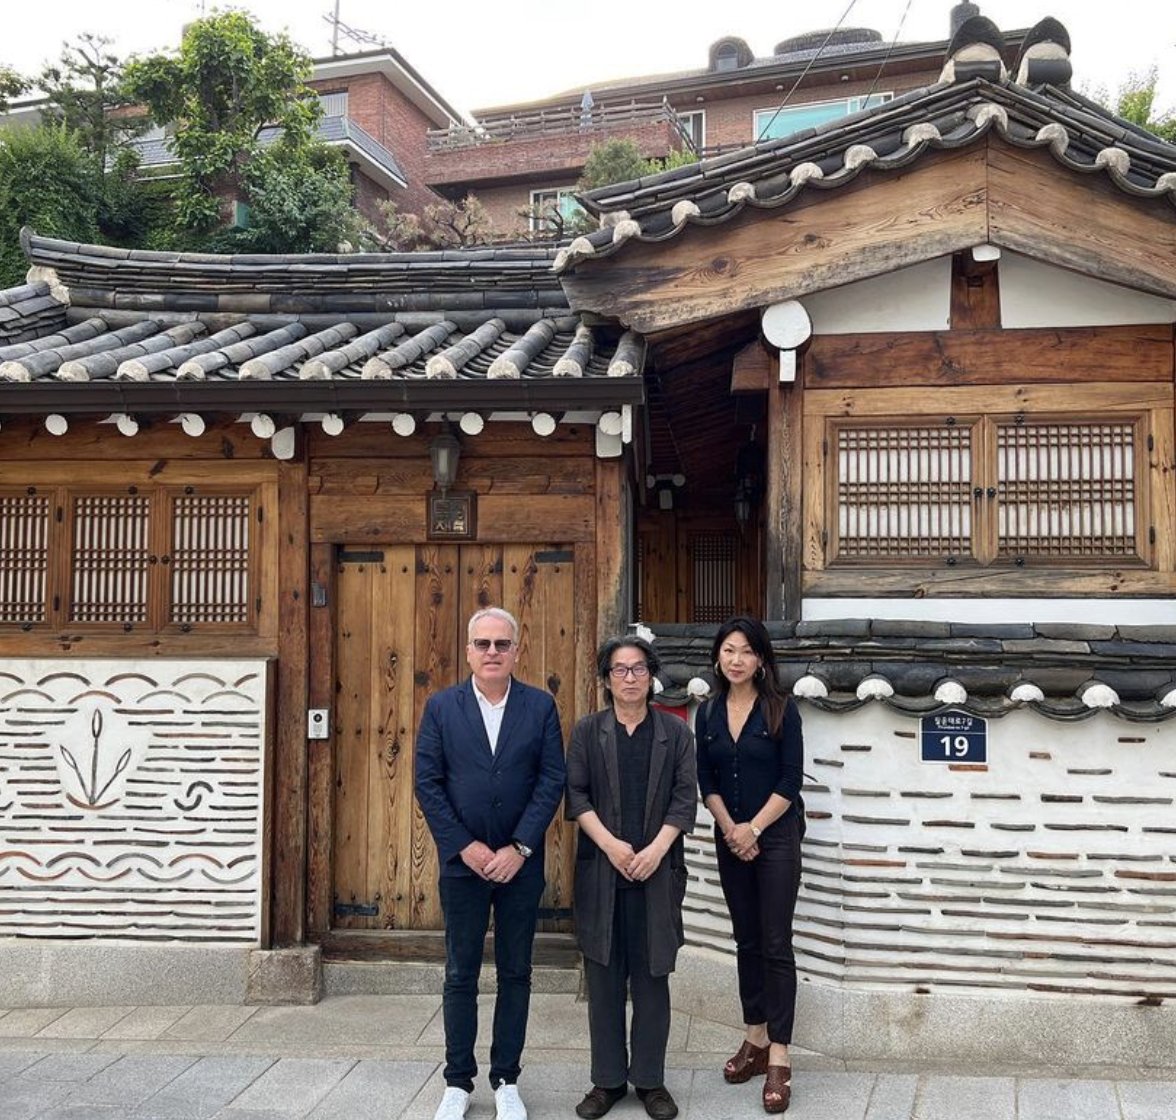 Enjoyed spending yesterday afternoon with Korea’s famous calligrapher ByungIn Kang in Seoul.

#seoul #korea #jamessuckling #winelover #winecritic #winetravel #winetourism #calligraphy